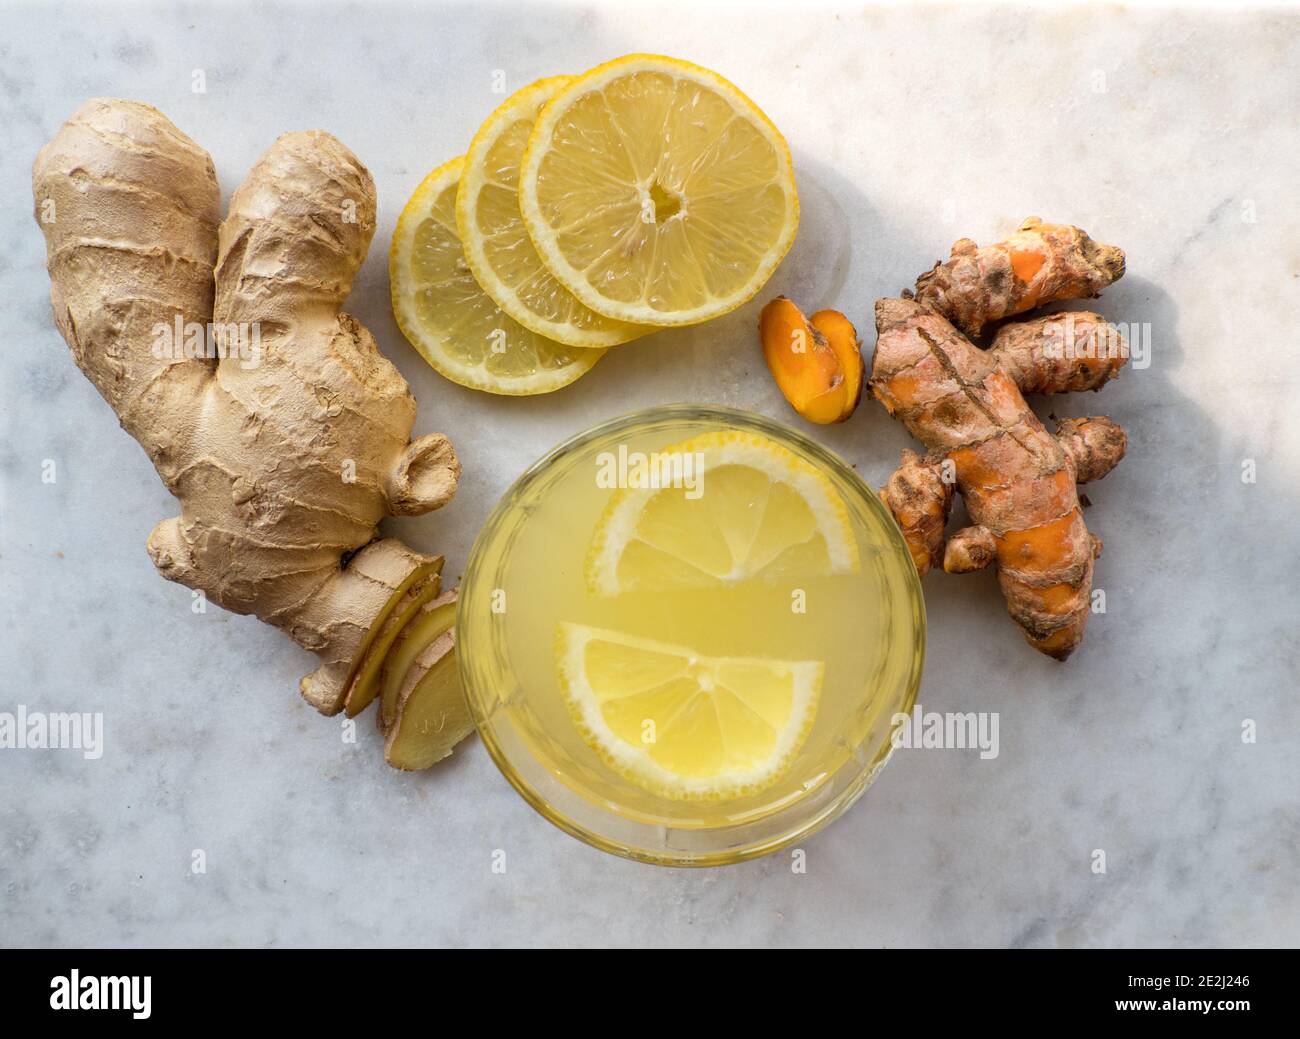 Top view of a glass of hot lemon and turmeric ginger tea, a healthy and naturally immune system boosting cold remedy Stock Photo